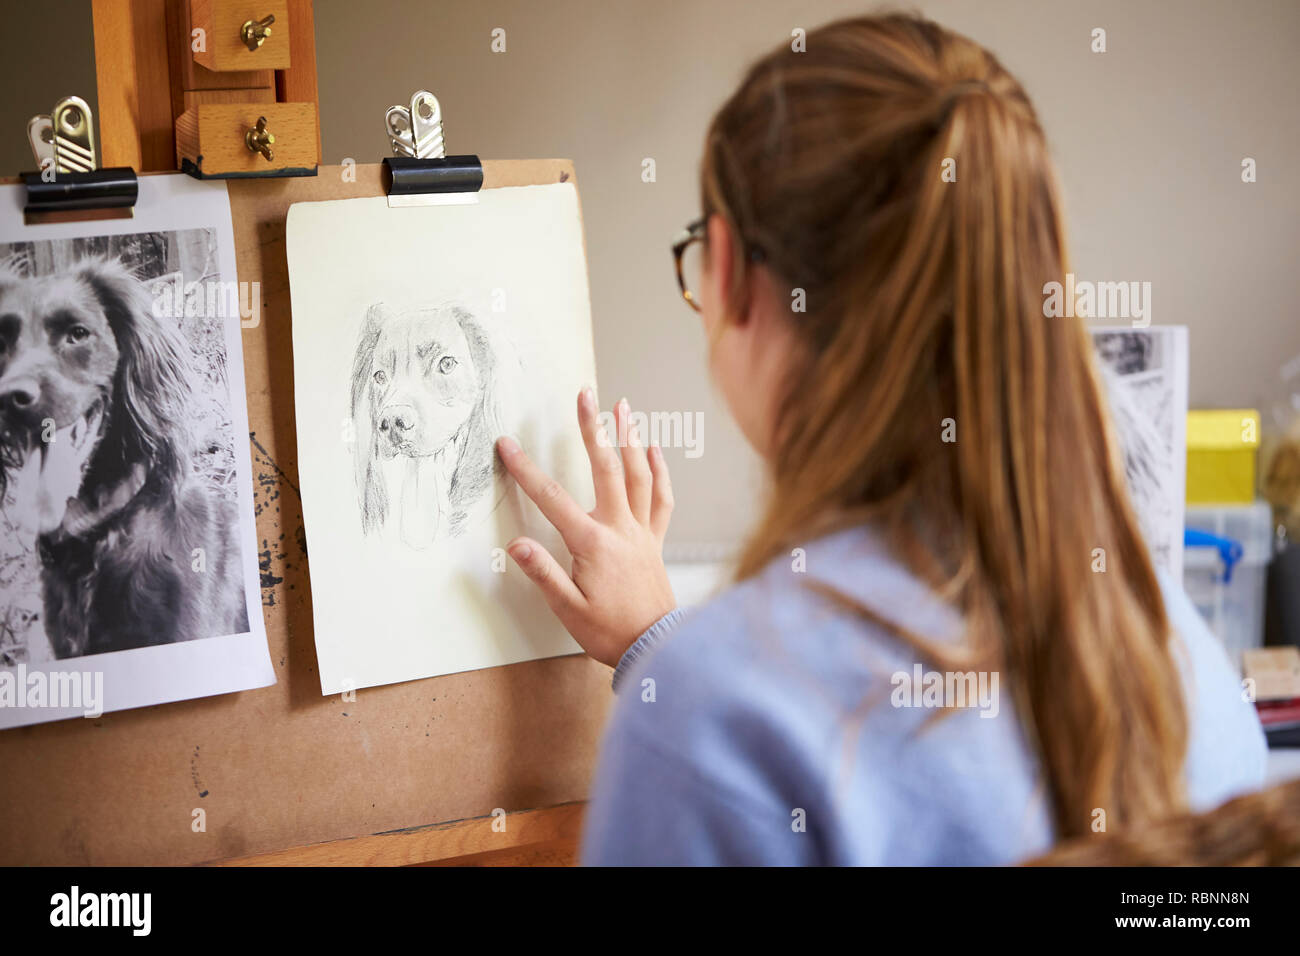 Rear View Of Female Teenage Artist Sitting At Easel Drawing Picture Of Dog From Photograph In Charcoal Stock Photo